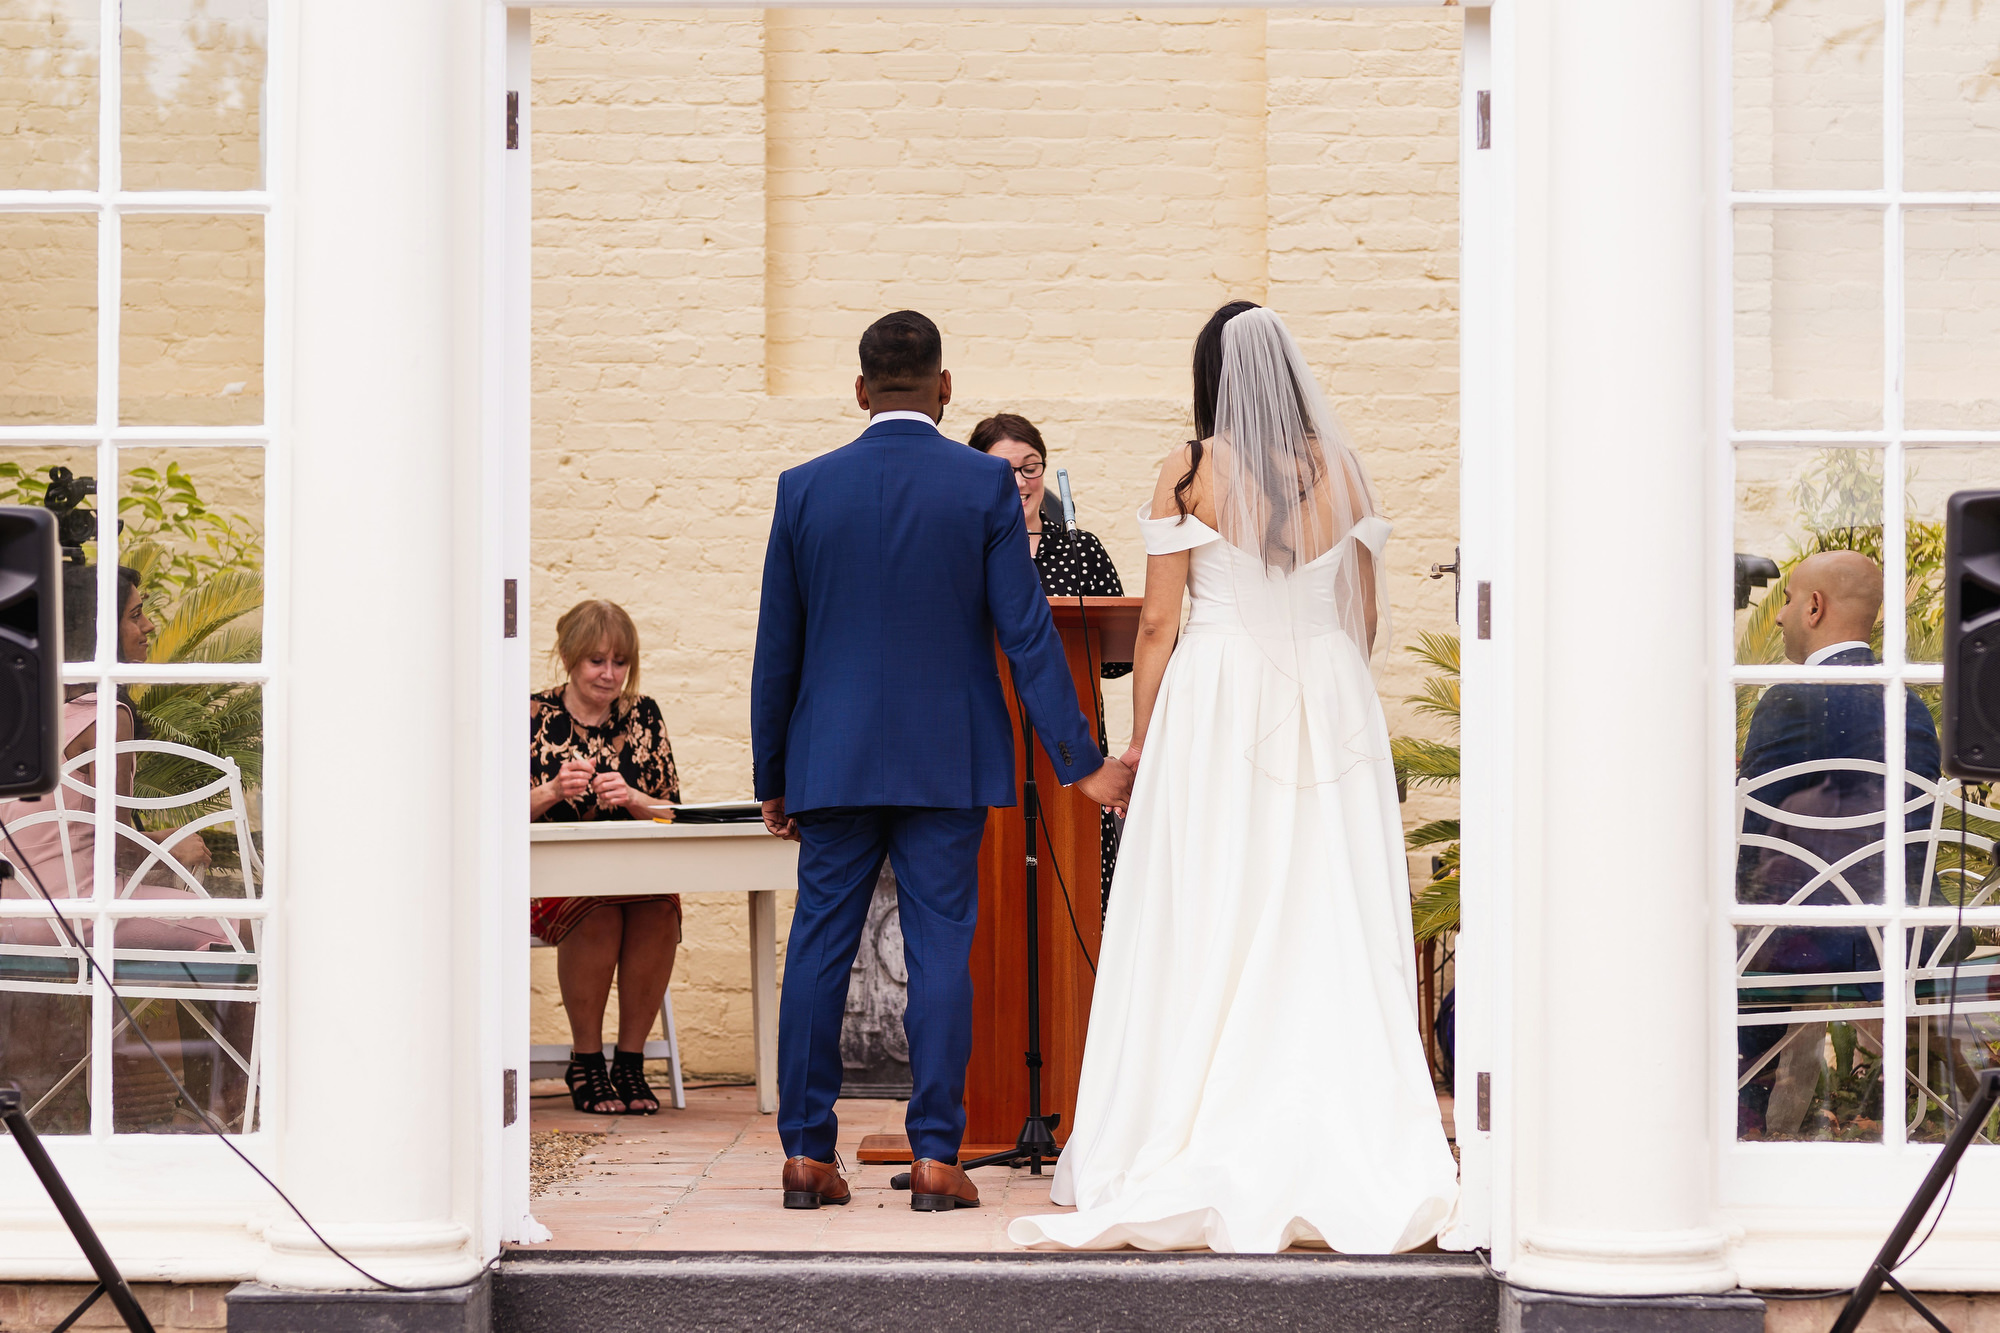 Langtons House, Essex, Natural wedding photography, Civil ceremony, The orangery room